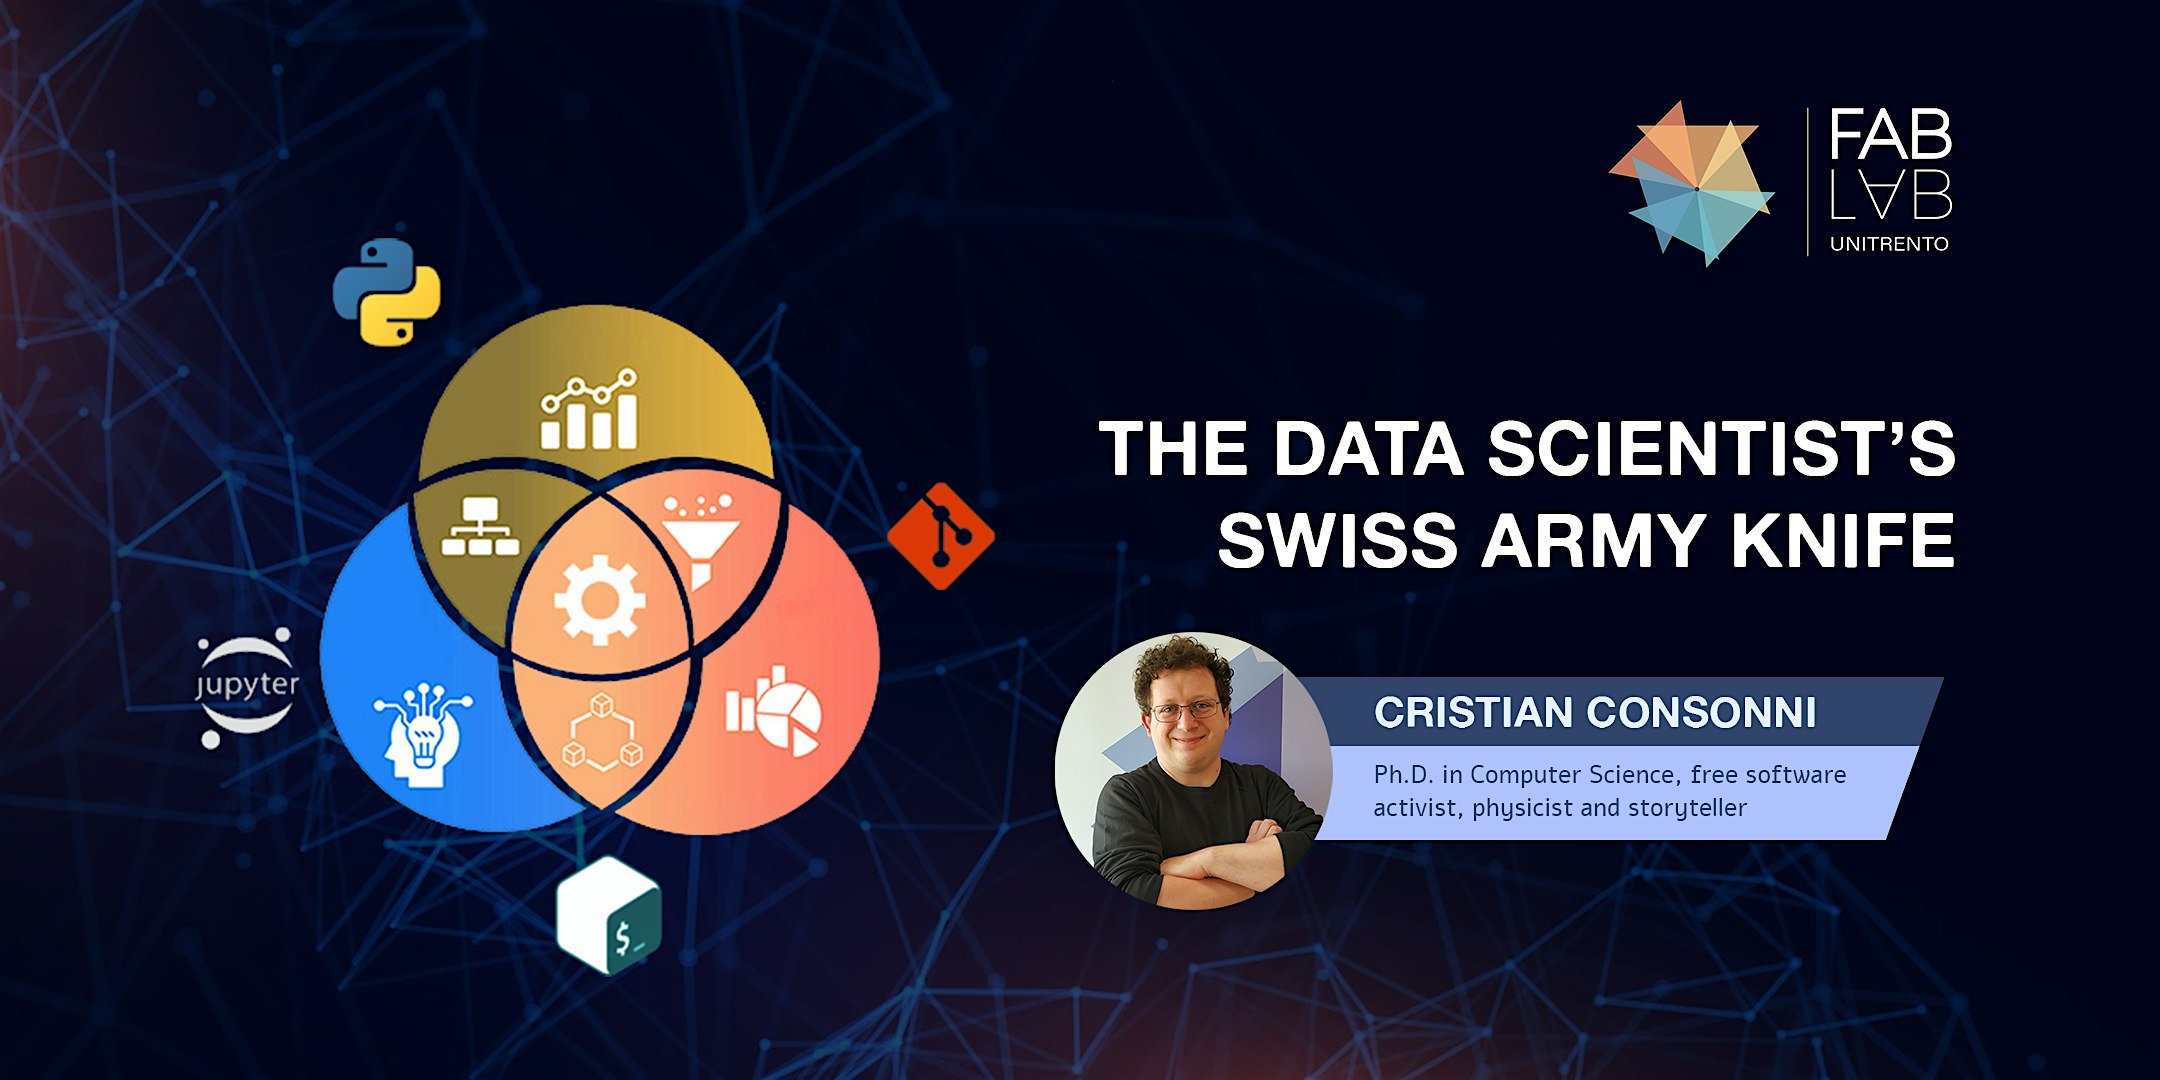 The Data Scientist’s Swiss Army Knife